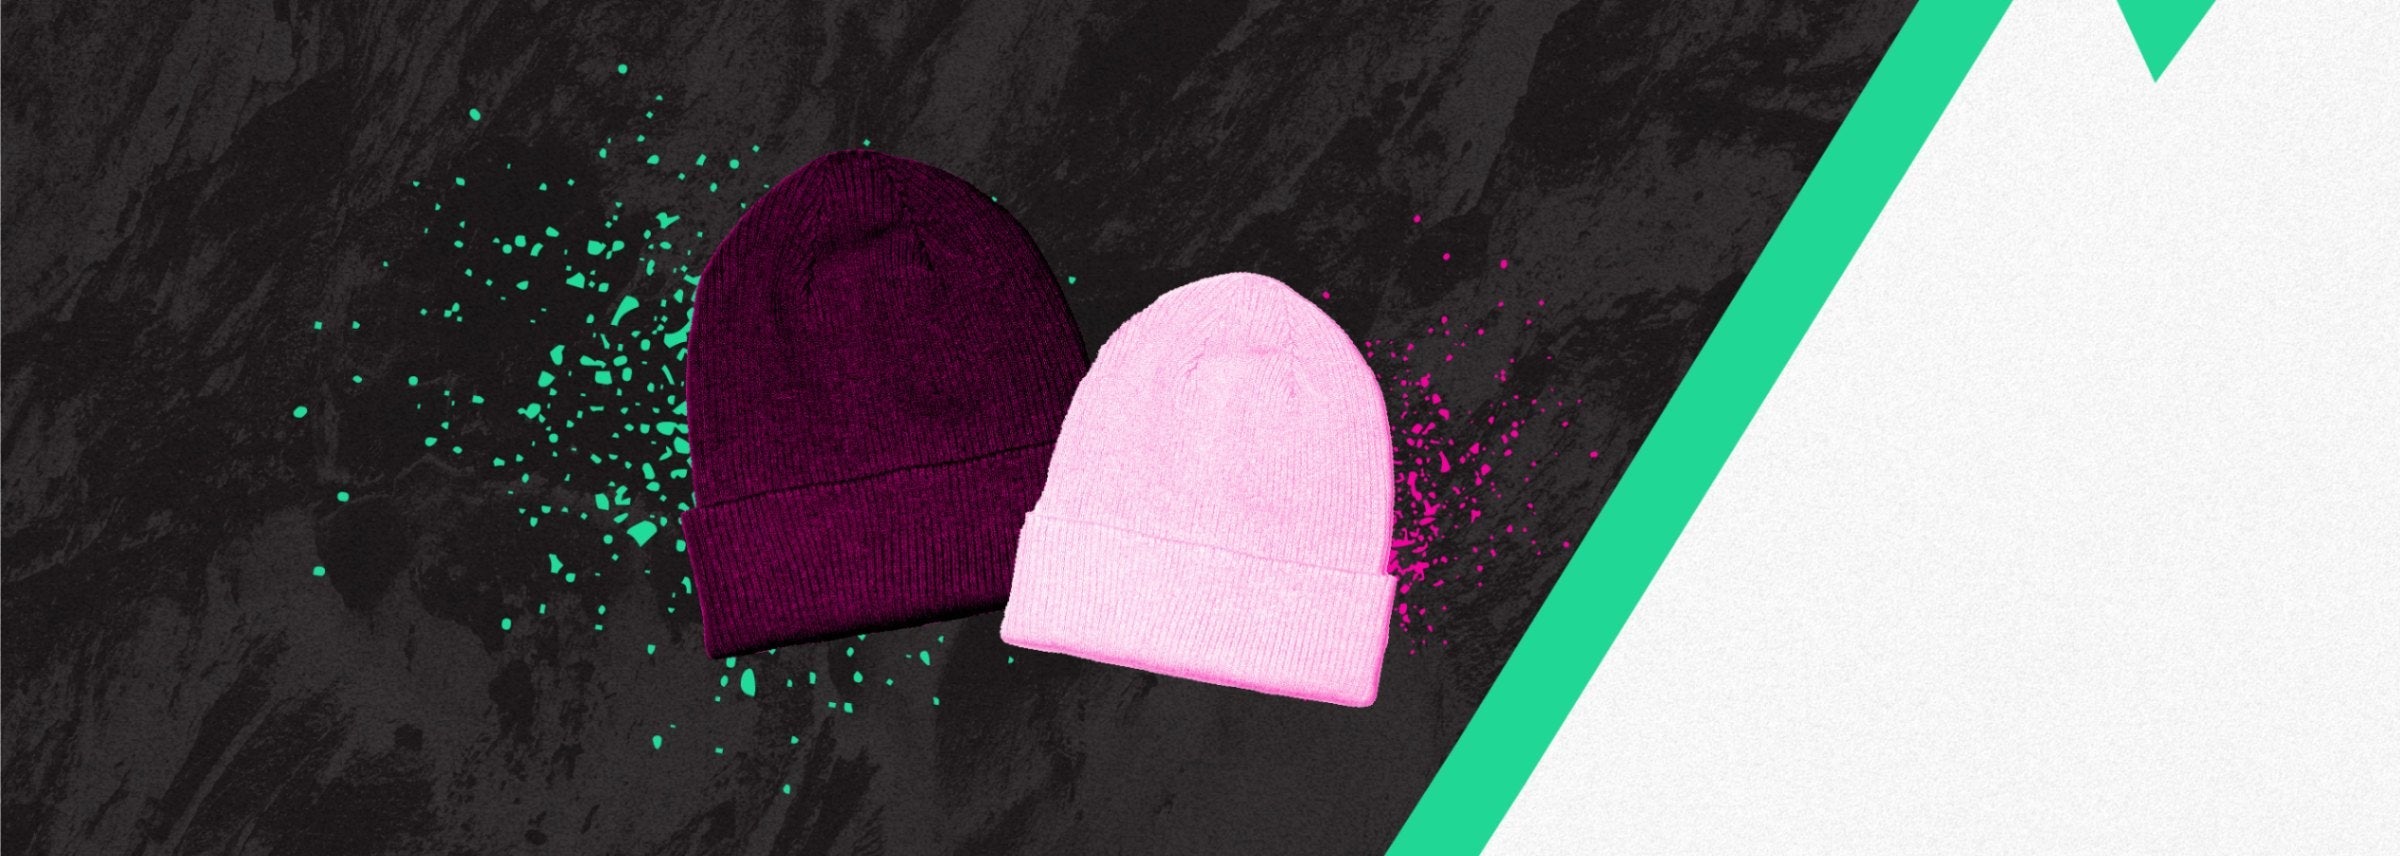 Touques/Beanies - Mountain Kids Outfitters